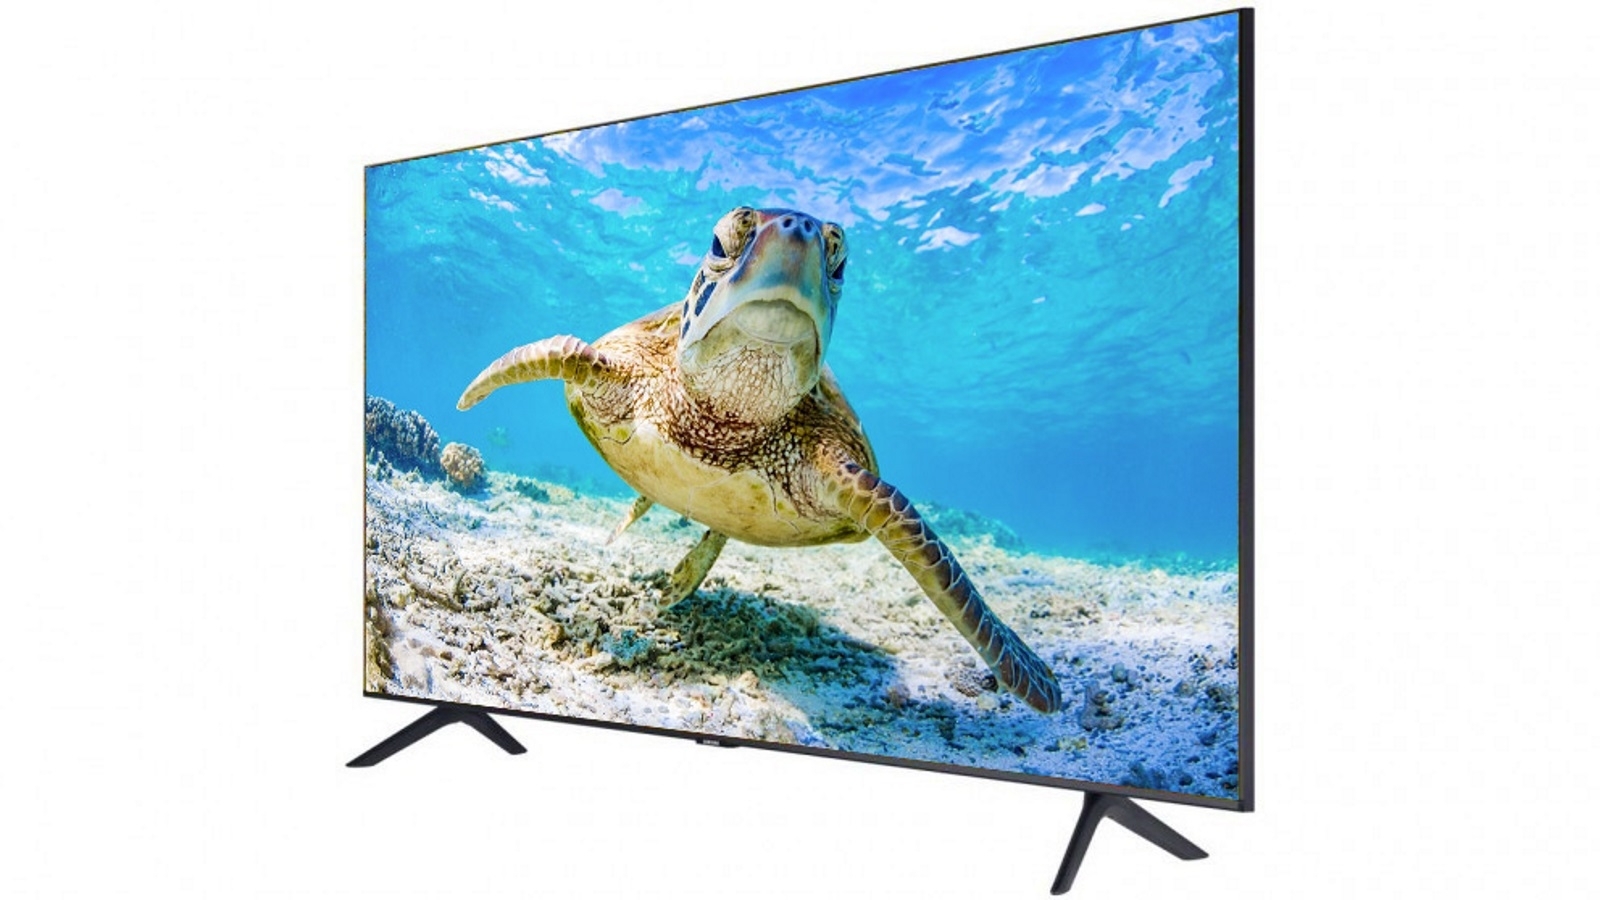 11++ Product reviews of samsung 65 tu8000 4k uhd smart led tv ideas in 2021 